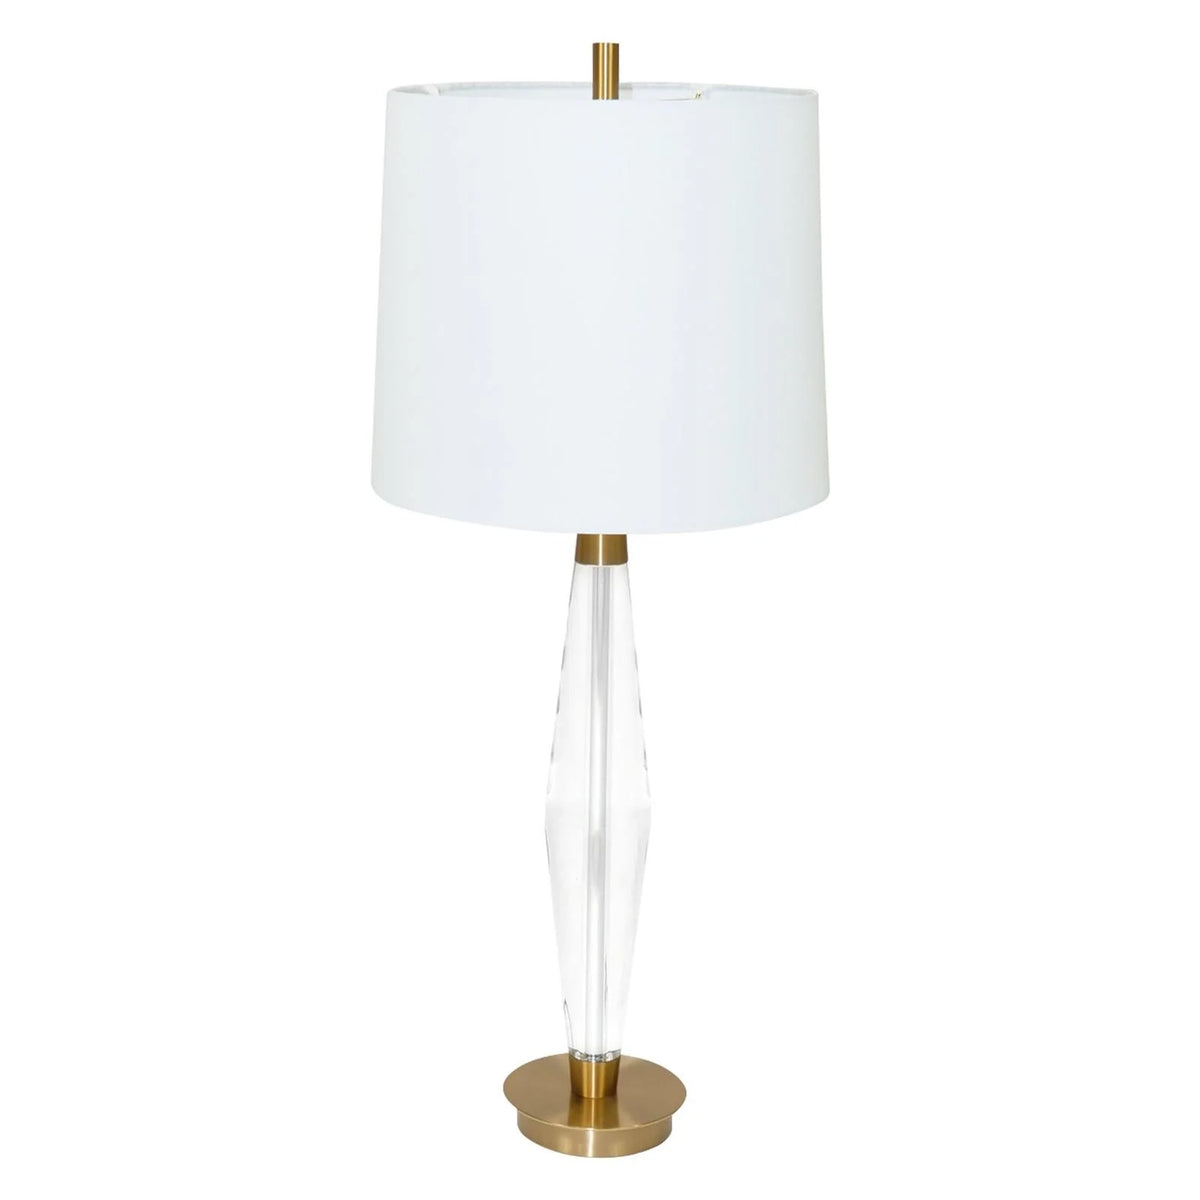 Novell Lamp - Antique Gold & Crystal Glass Finish